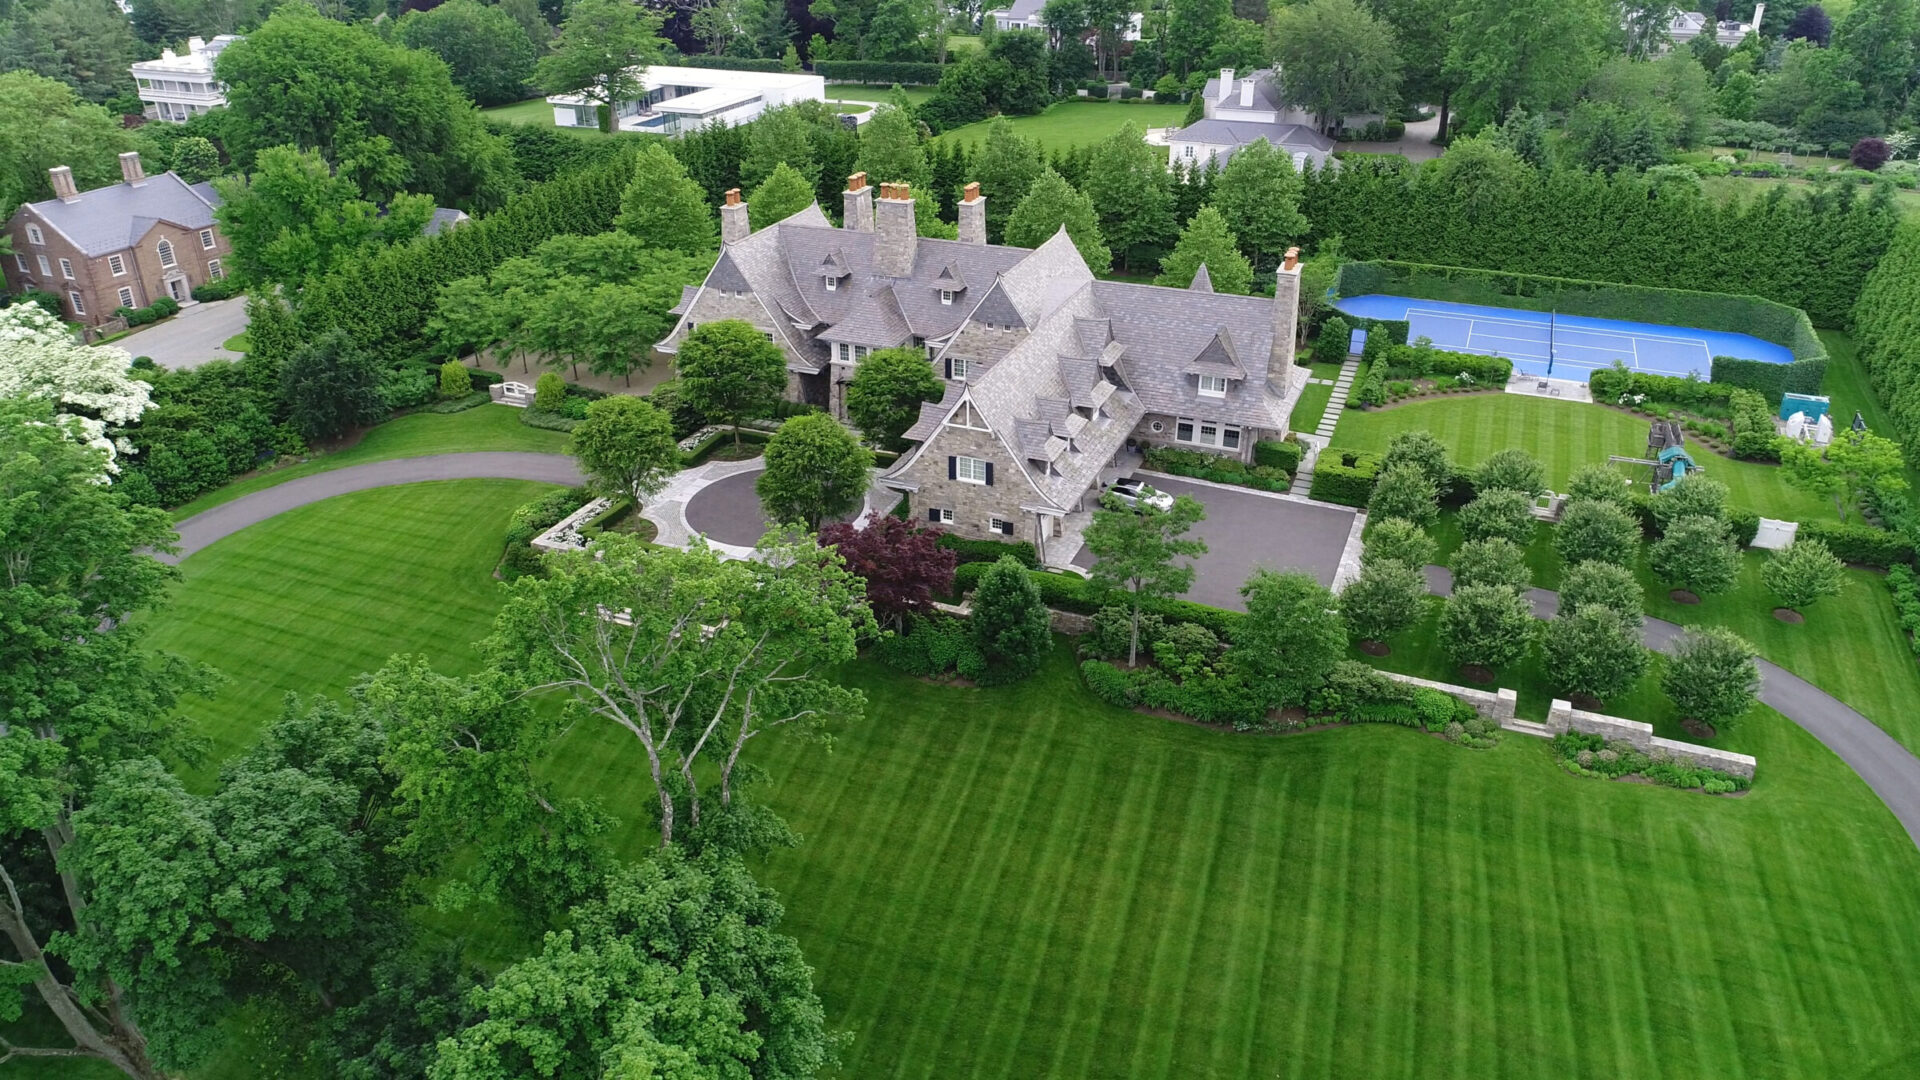 Aerial view of a large, luxurious estate with a stone house, manicured lawns, circular driveway, swimming pool, and adjacent buildings in a lush area.